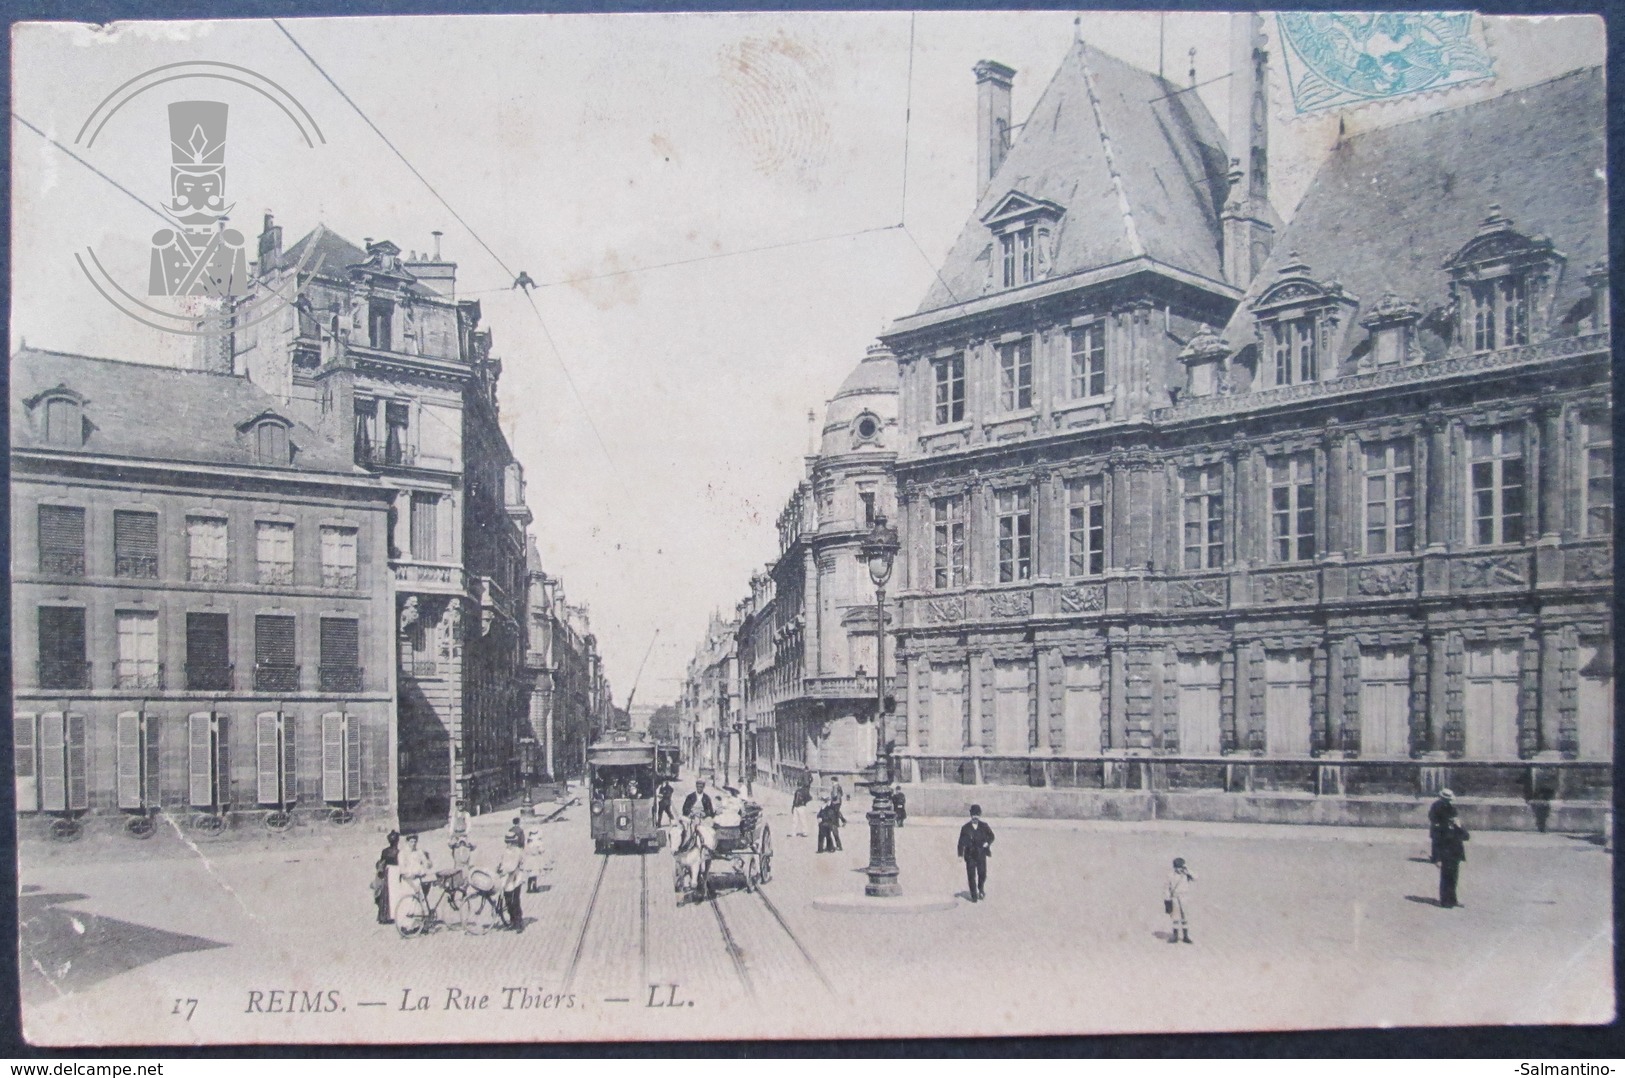 OLD POSTCARD - CP - 17 REIMS - LA RUE THIERS - CARTE POSTALE - NEUILLY EN THELLE - POSTED CIRCULATED 1908 - Reims